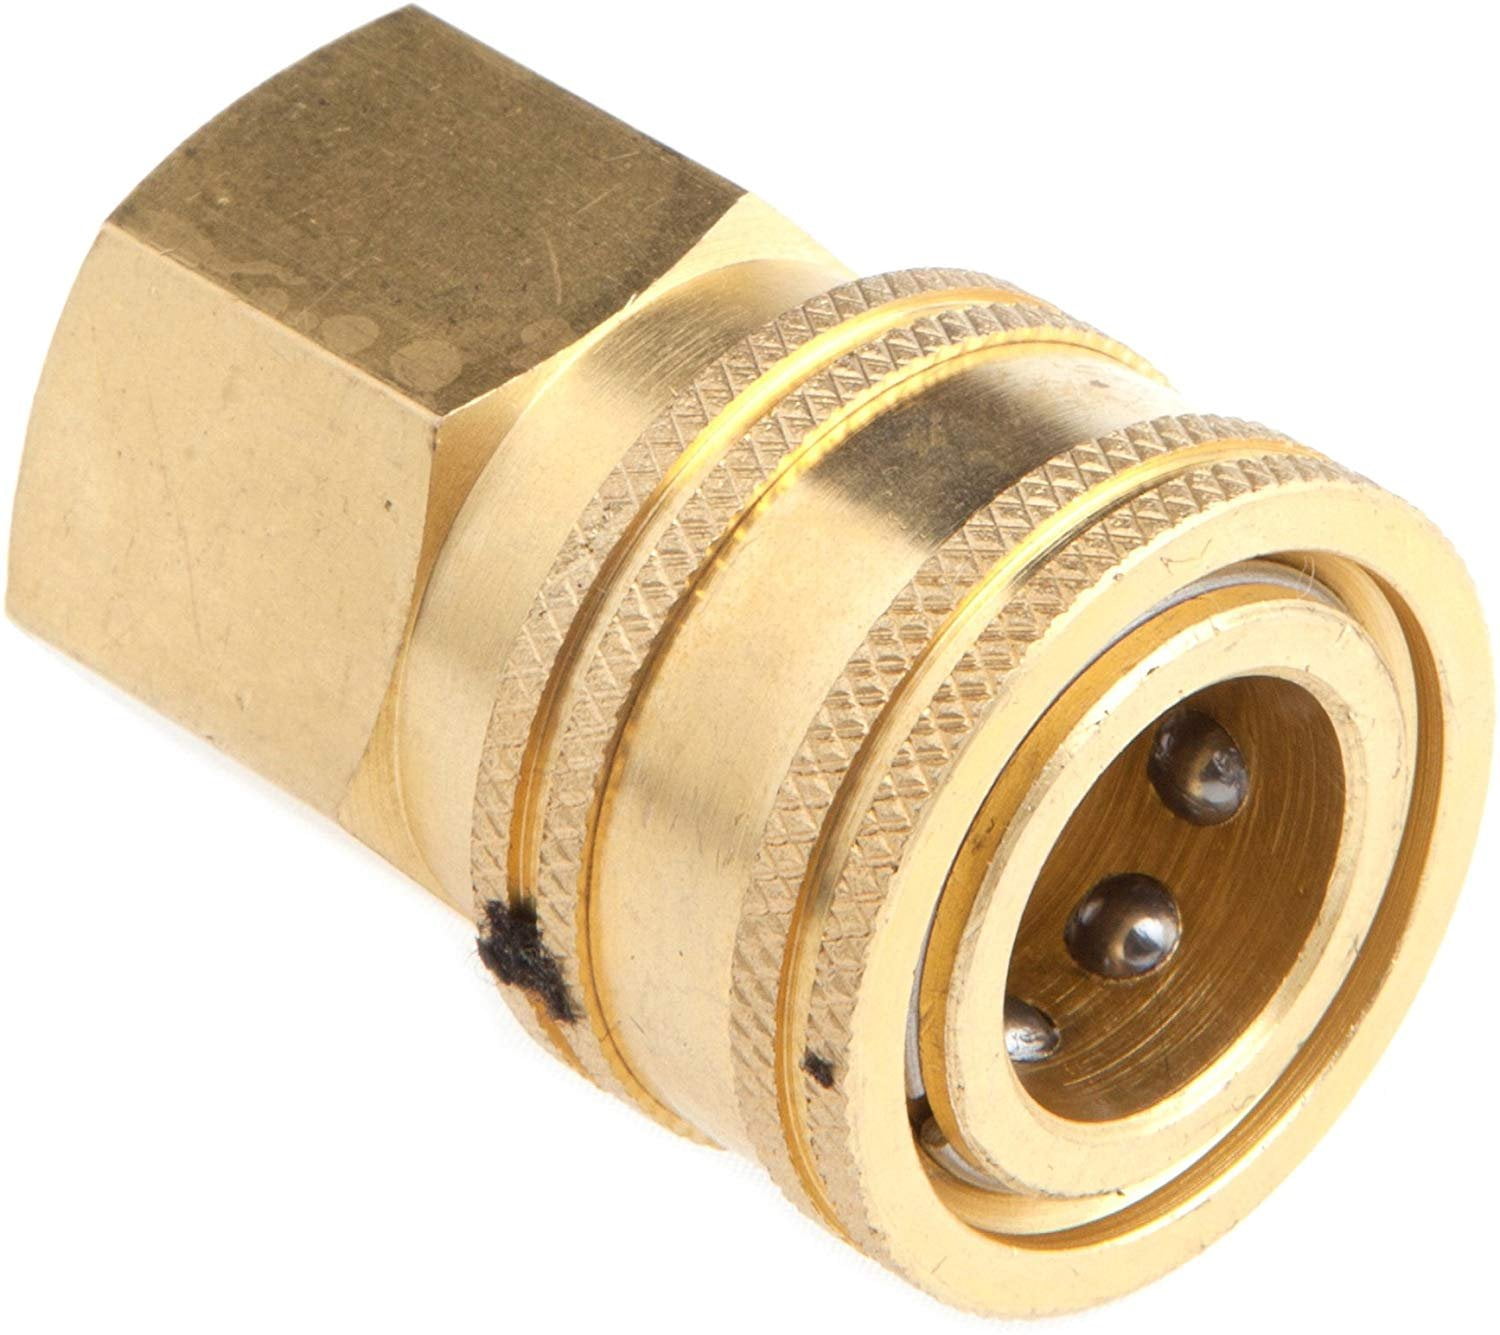 NEW FORNEY Quick Connect Plug Coupling 1/4" Male 75134 